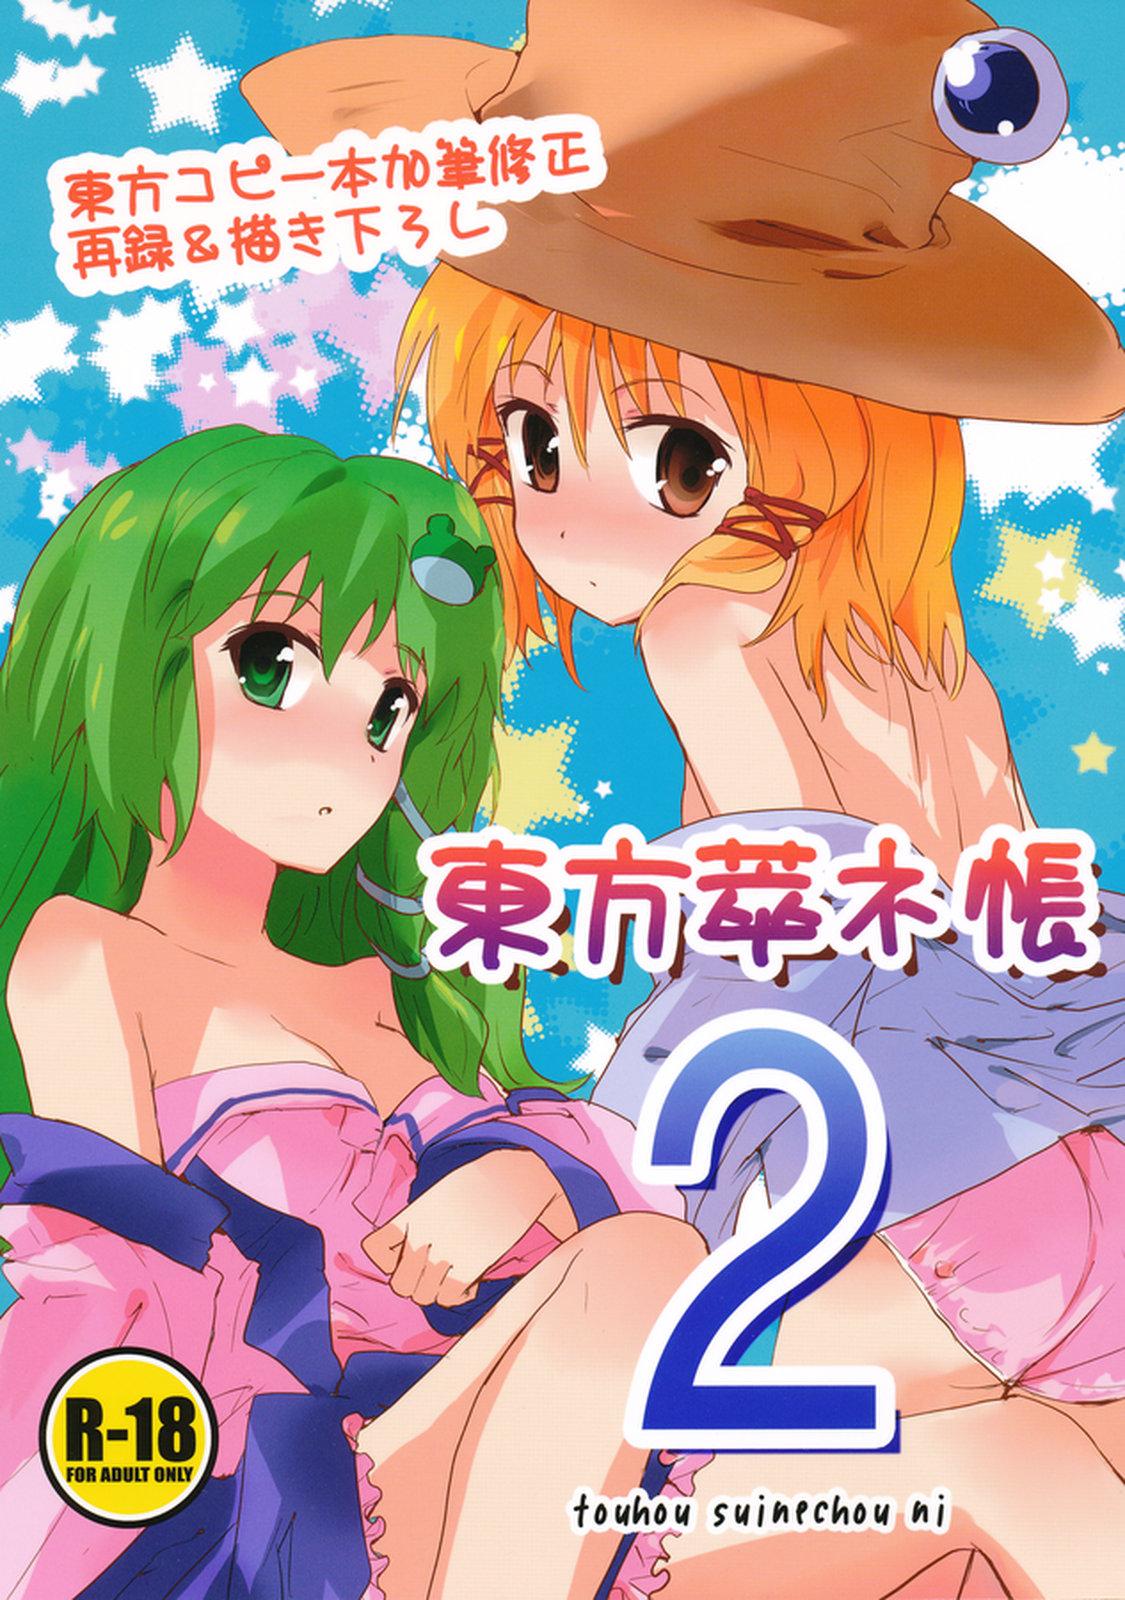 Hooker Touhou Suinechou 2 - Touhou project Jap - Picture 1